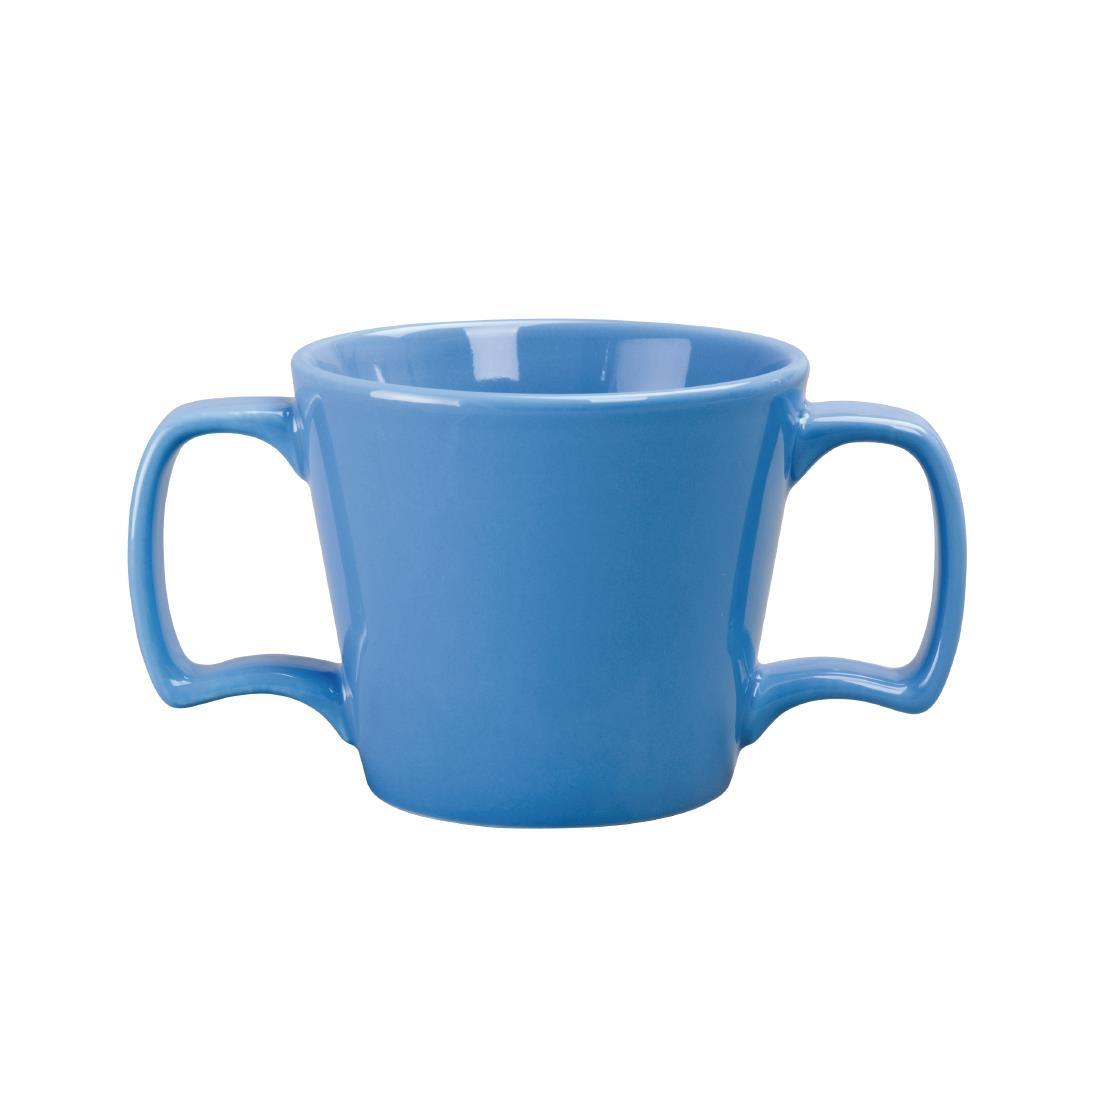 Olympia Heritage Double Handle Mug Blue 300ml (Pack of 6) - DW143  - 1